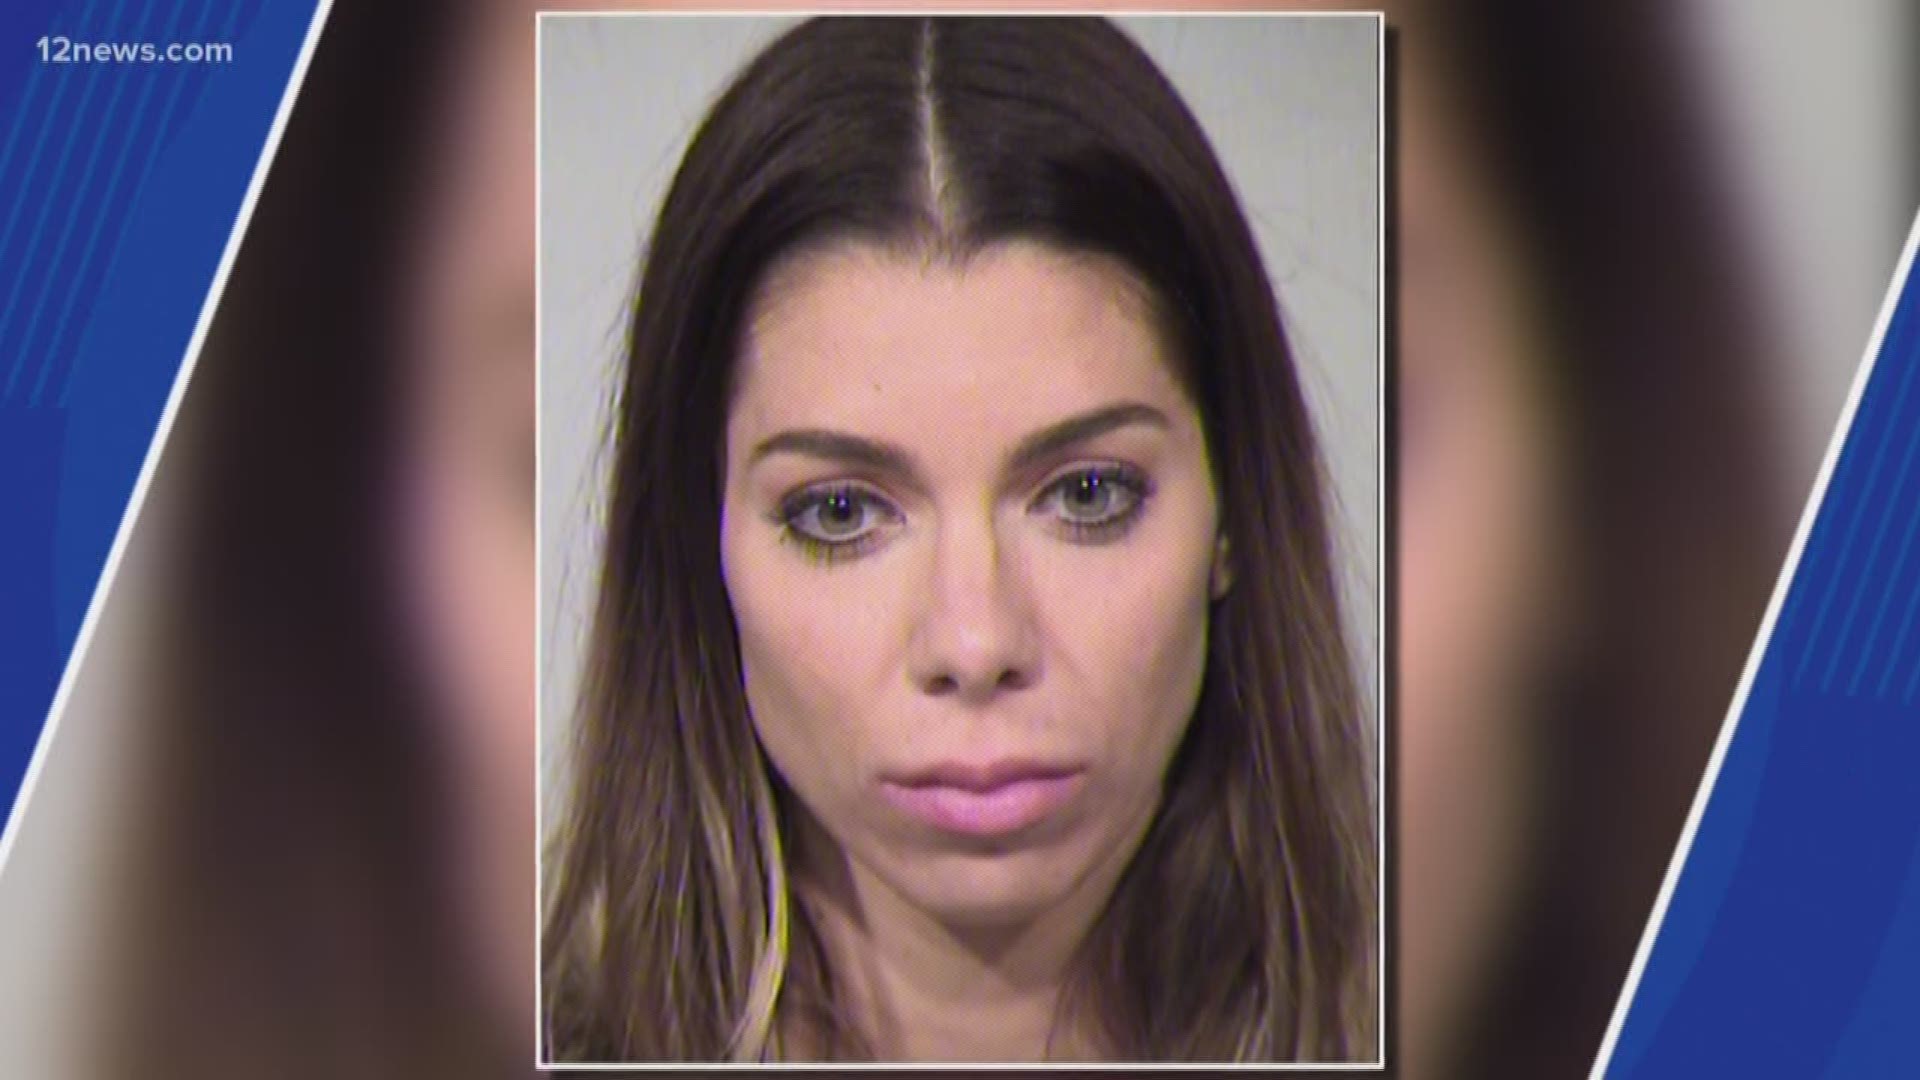 An East Valley mom faces child abuse charges after she left her 4-year-old daughter home alone so she could go partying. Court documents say the mom made no attempt to find a baby sitter for her young daughter.